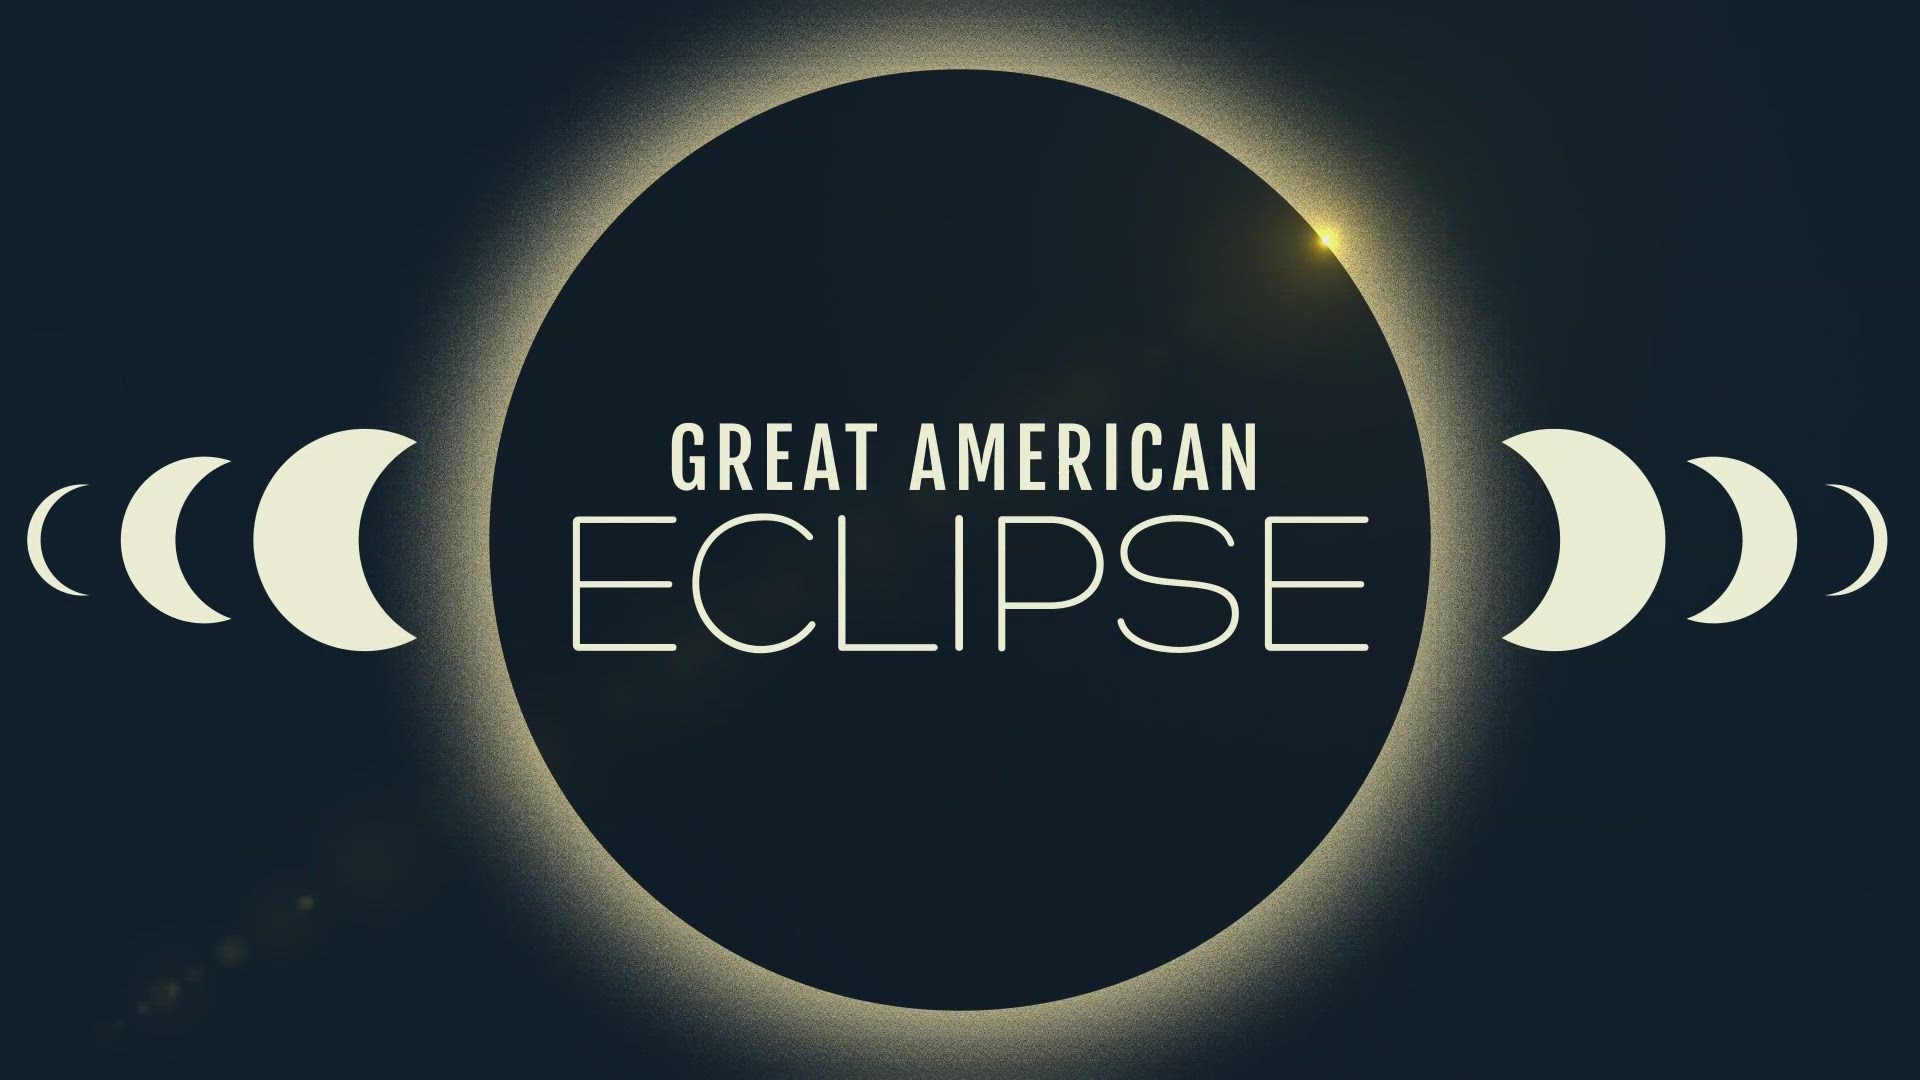 Full coverage of the solar eclipse across the region.